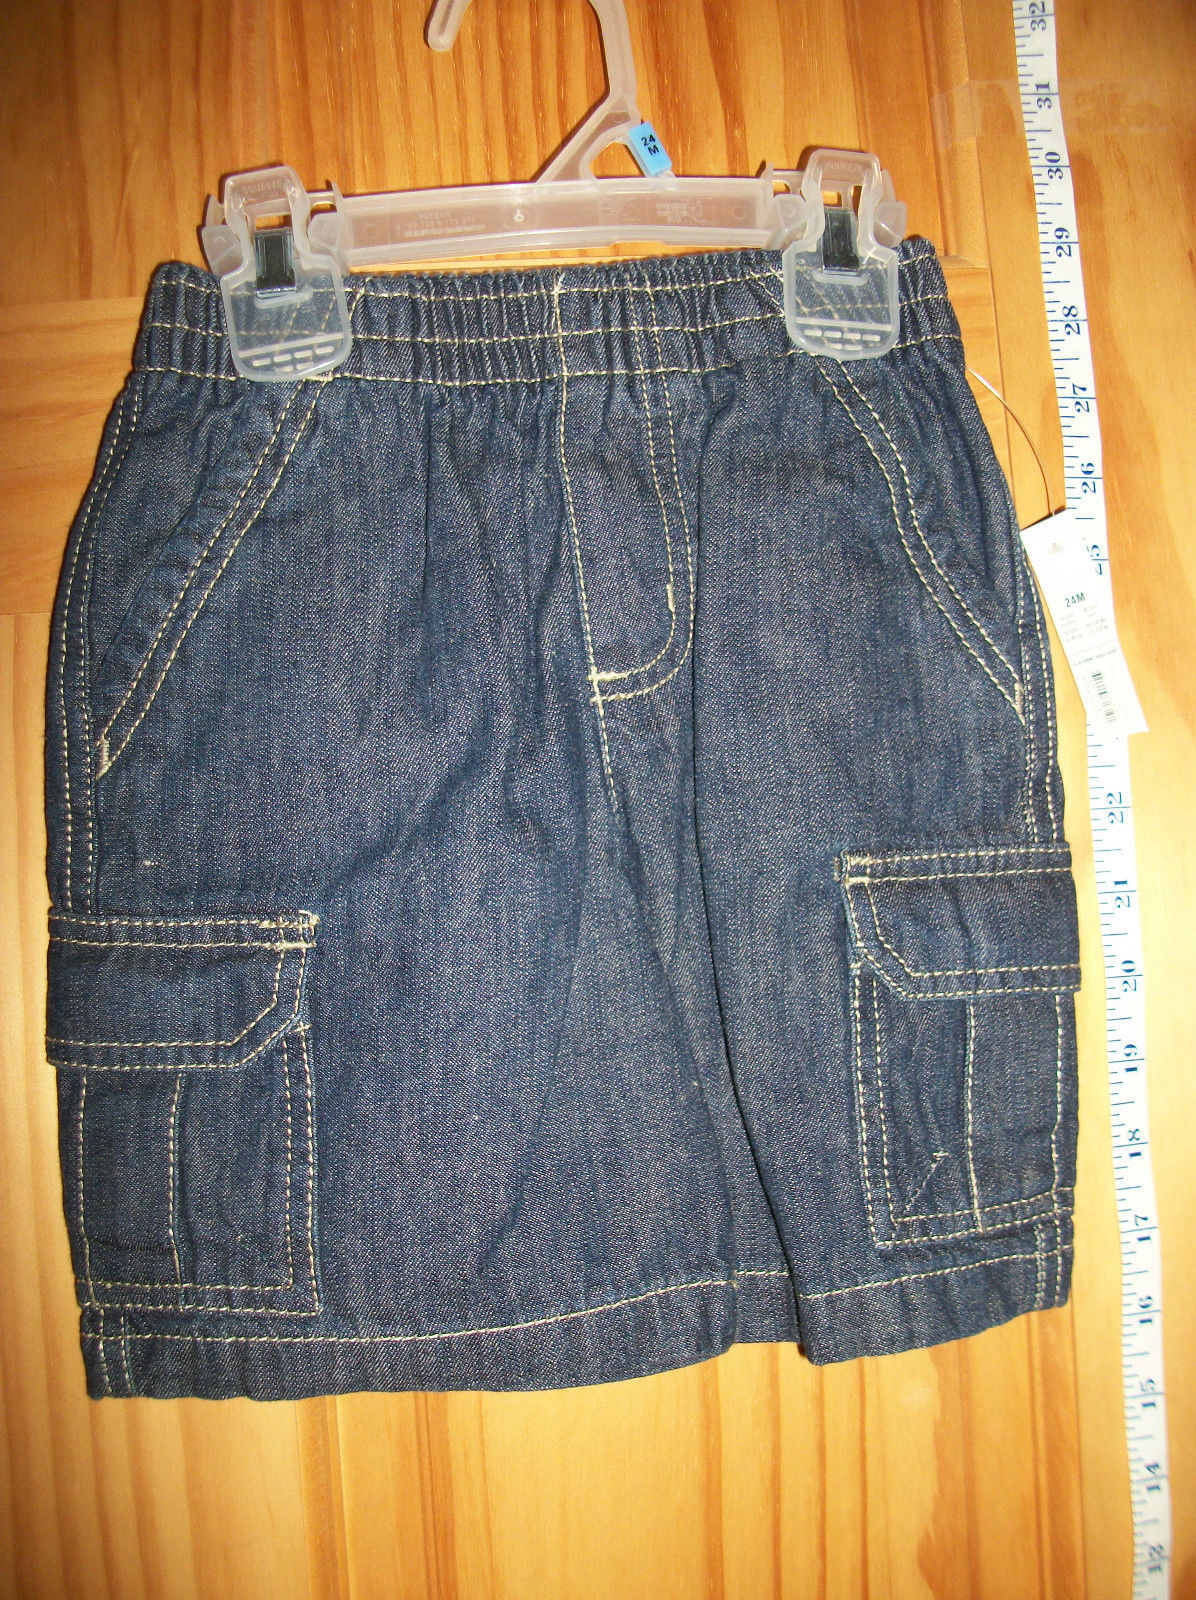 Faded Glory Baby Clothes 24M Infant Child Cargo Short Blue Denim Pull-up Bottoms - $9.49